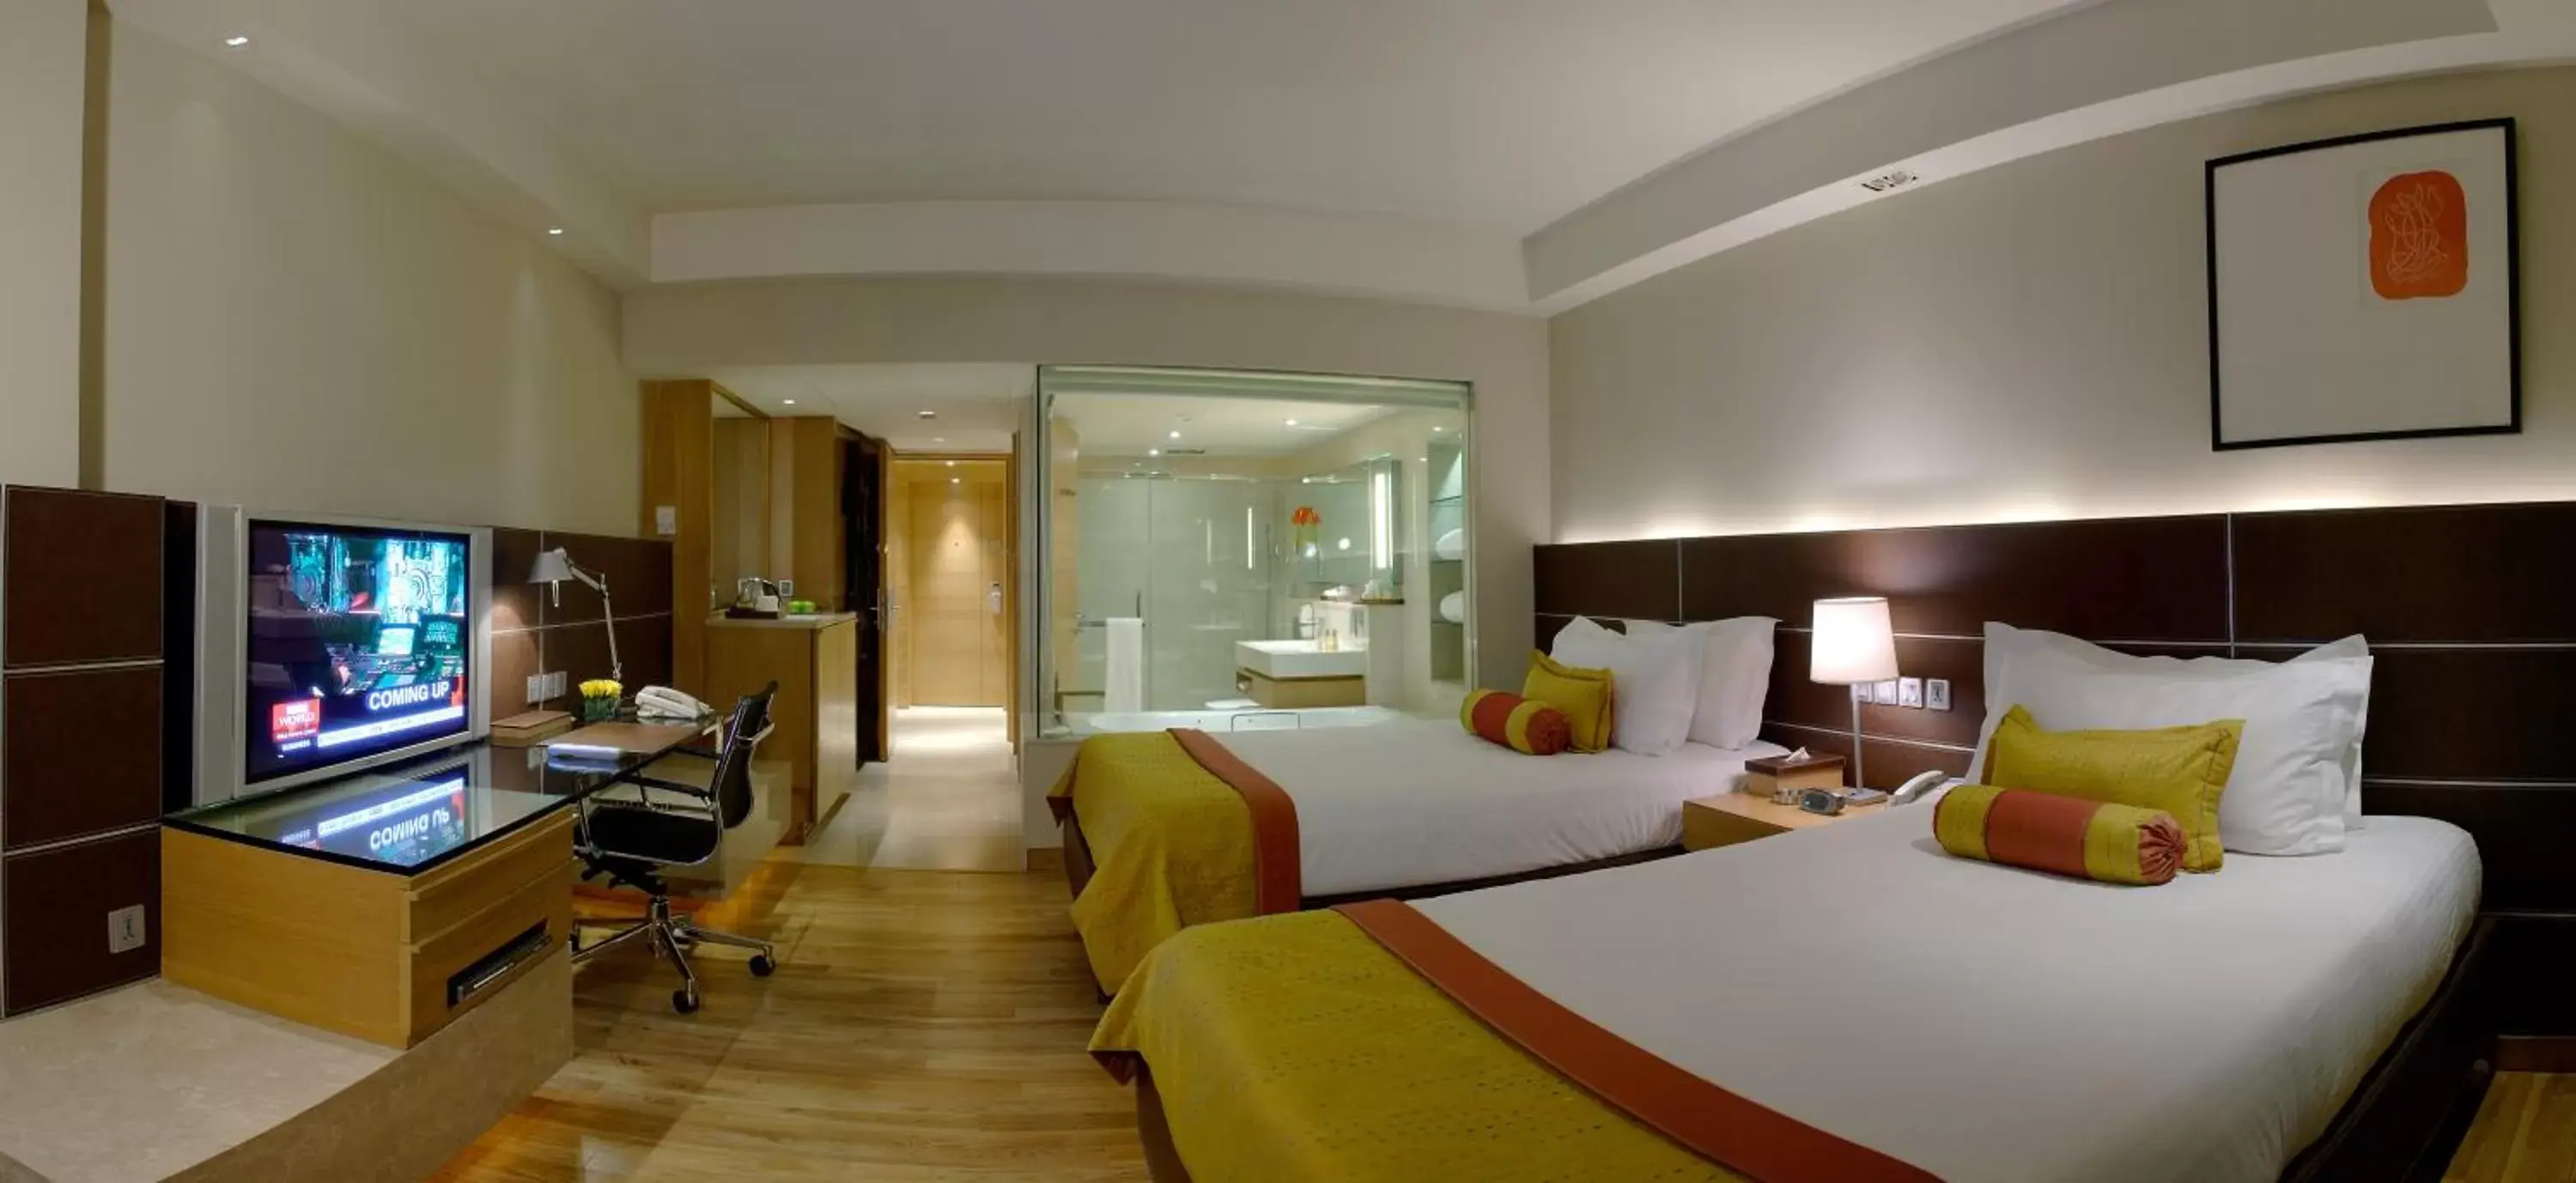 Deluxe Twin Room - 10% discount on Food & soft beverages, Laundry & Spa in The LaLiT New Delhi